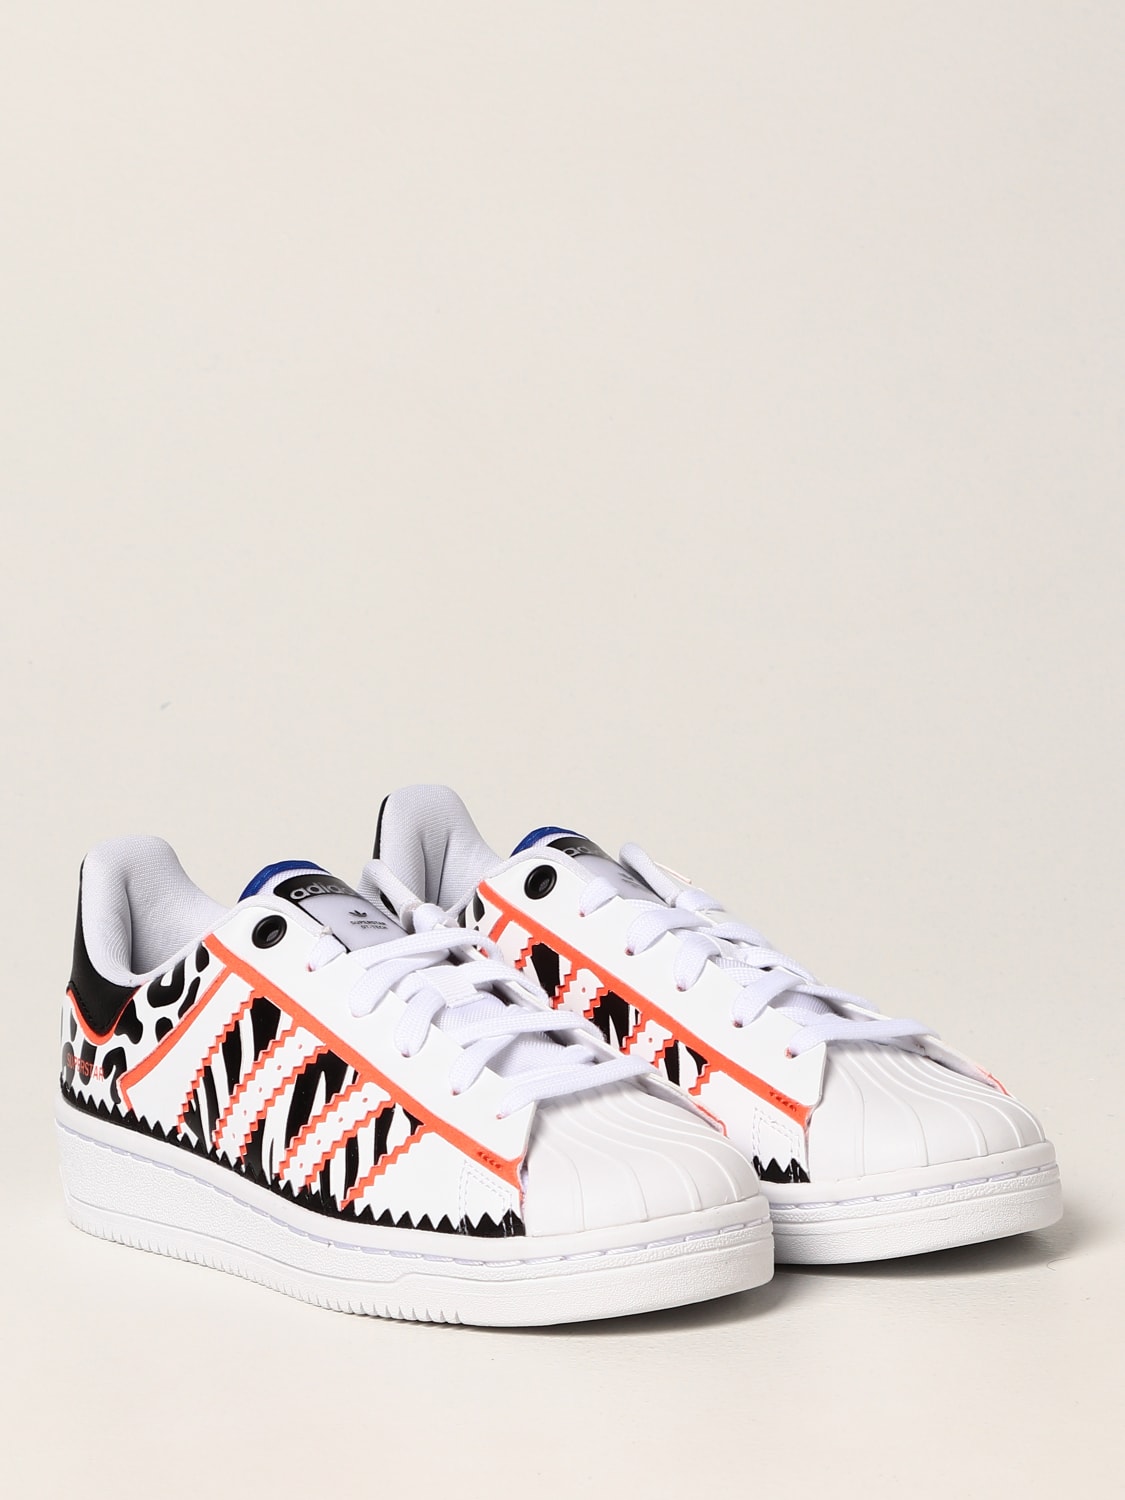 Adidas Originals Outlet: Adidas Original at GW0523 online shoes Originals | sneakers Adidas synthetic leather Superstar - White in